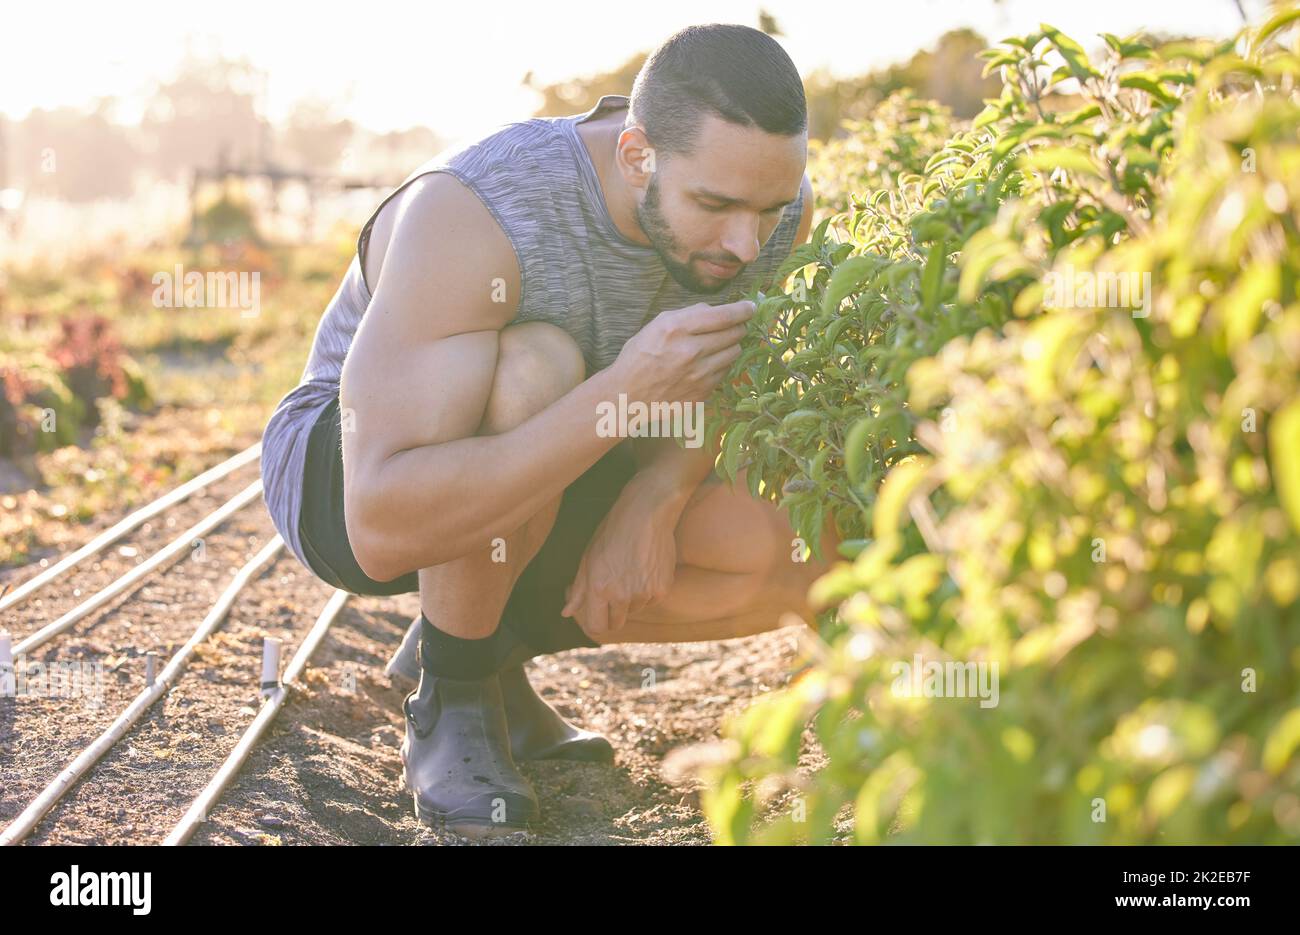 These herbs will be delicious in tonights dinner. Shot of a young man smelling plants in his garden. Stock Photo